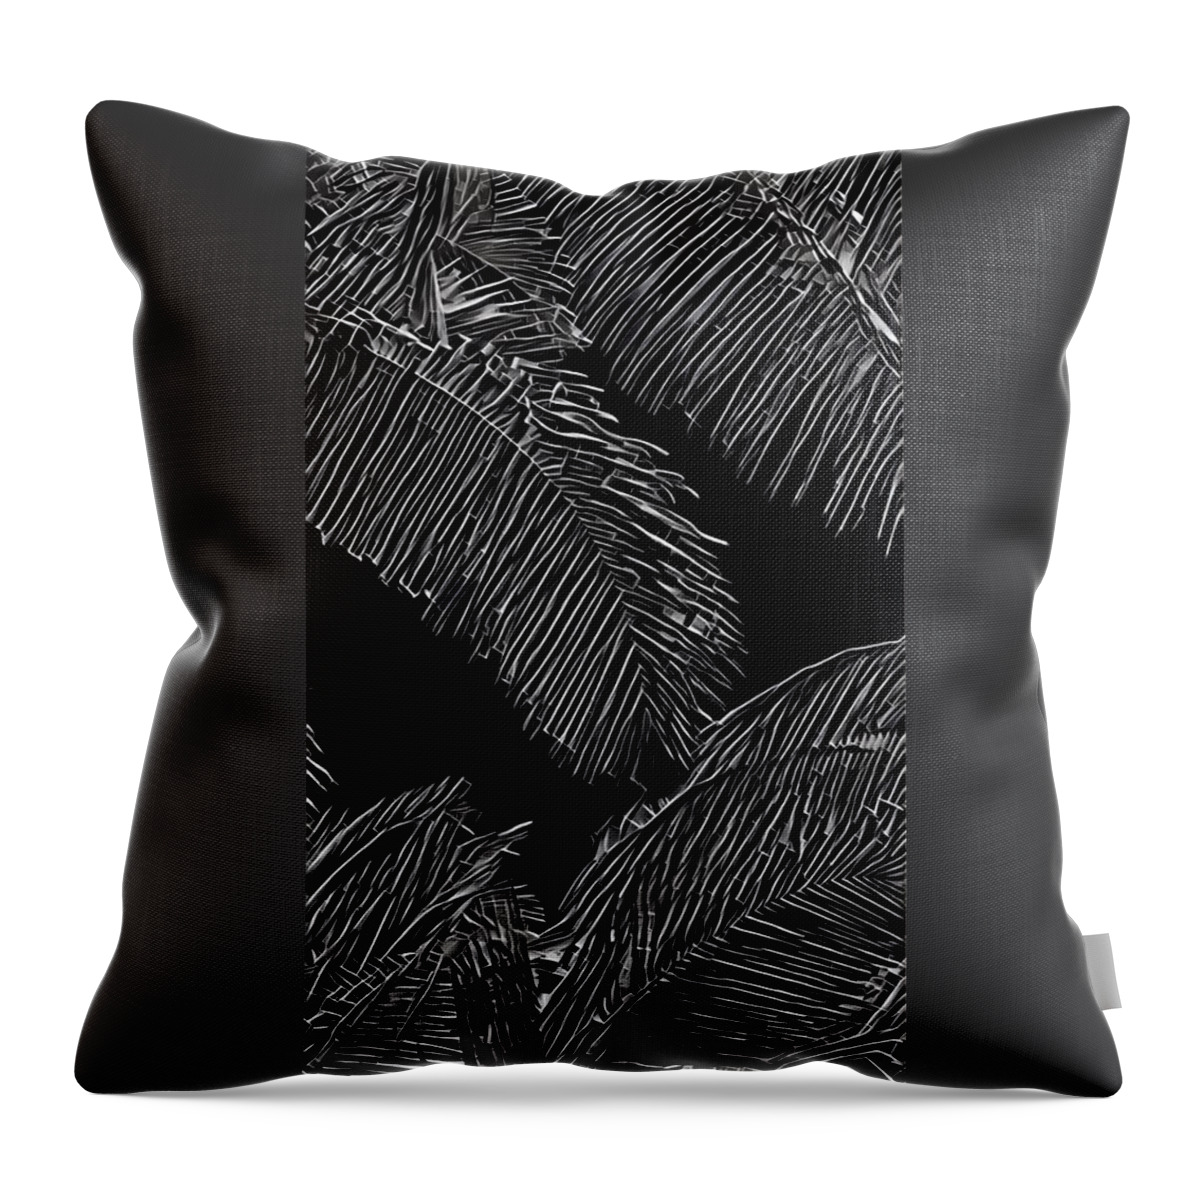 #flowersofaloha #blackandwhite #coconutpalms Throw Pillow featuring the photograph Coconut Palms in Black and White by Joalene Young